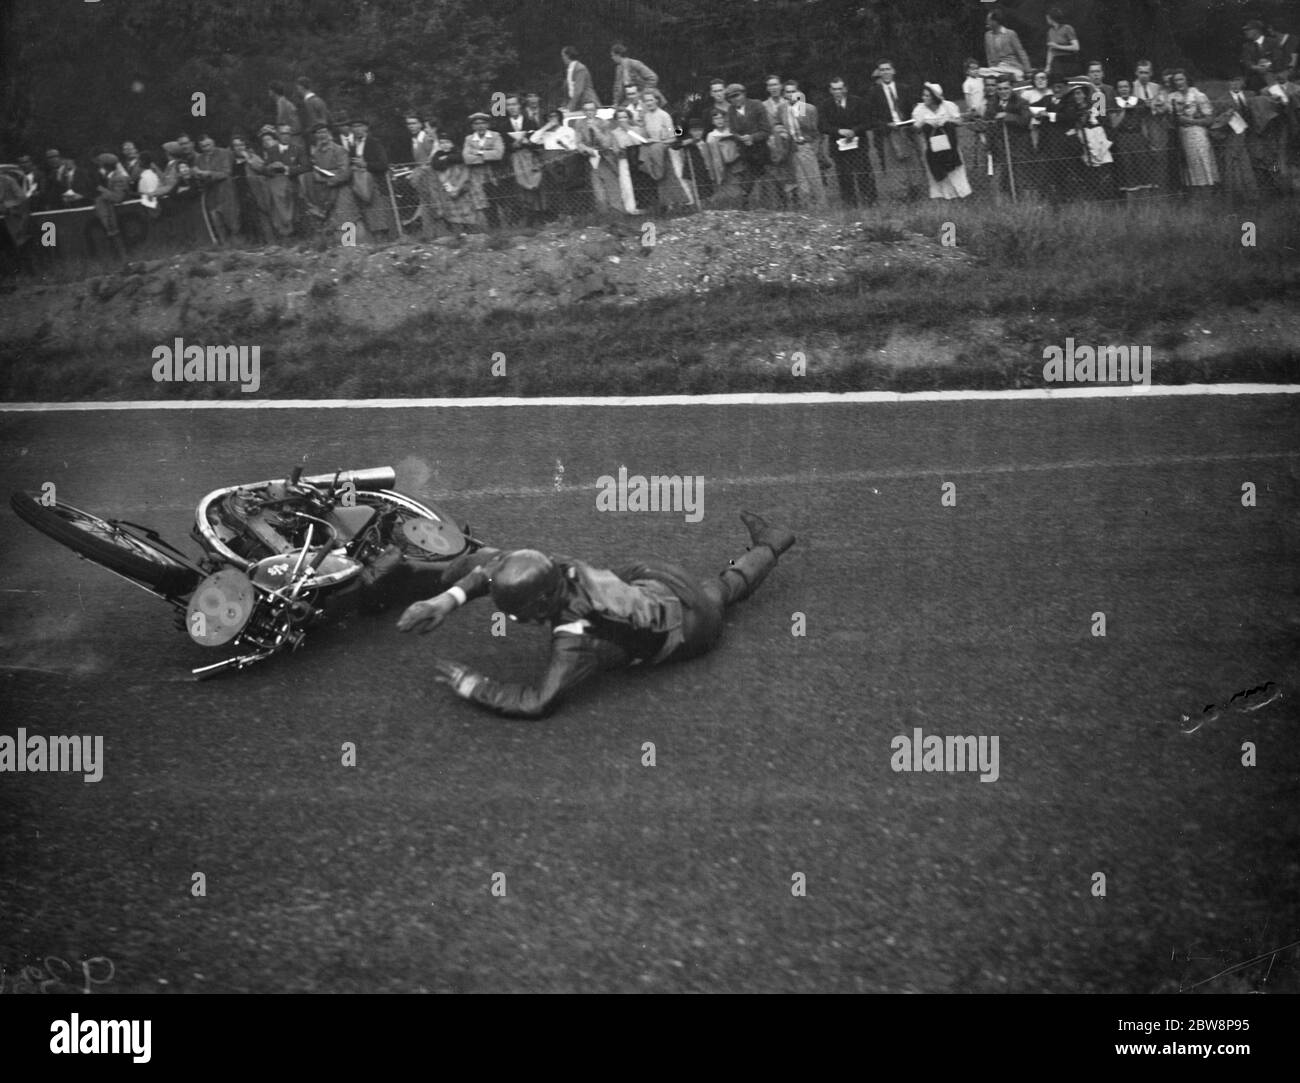 Crystal Palace road racing . A R Fosters bike skids out from under him . 1938 Stock Photo